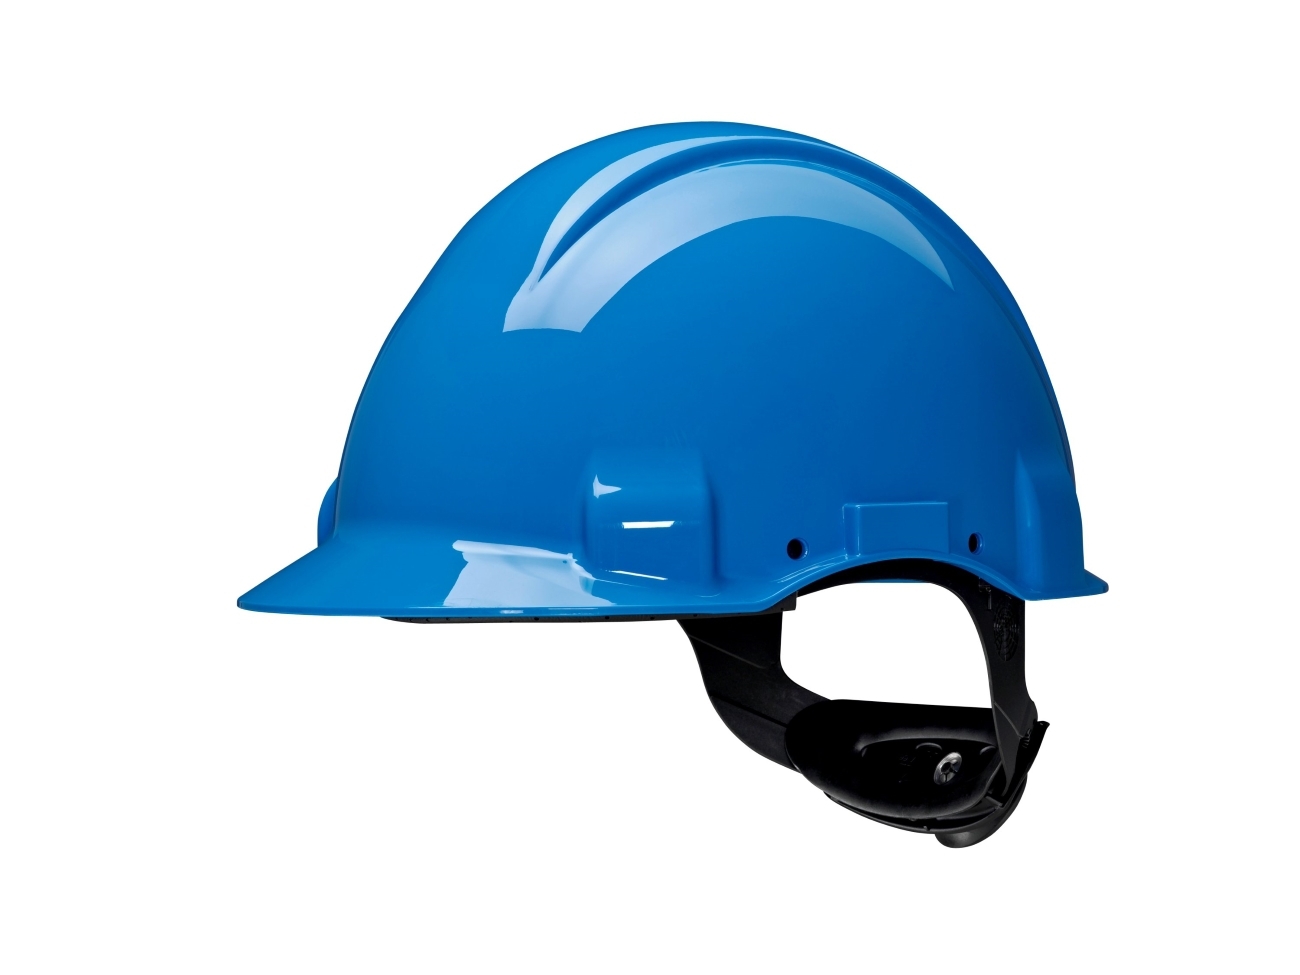 3M Safety helmet, Uvicator, ratchet fastening, non-ventilated, dielectric 440 V, plastic sweatband, blue, G3001NUV-BB